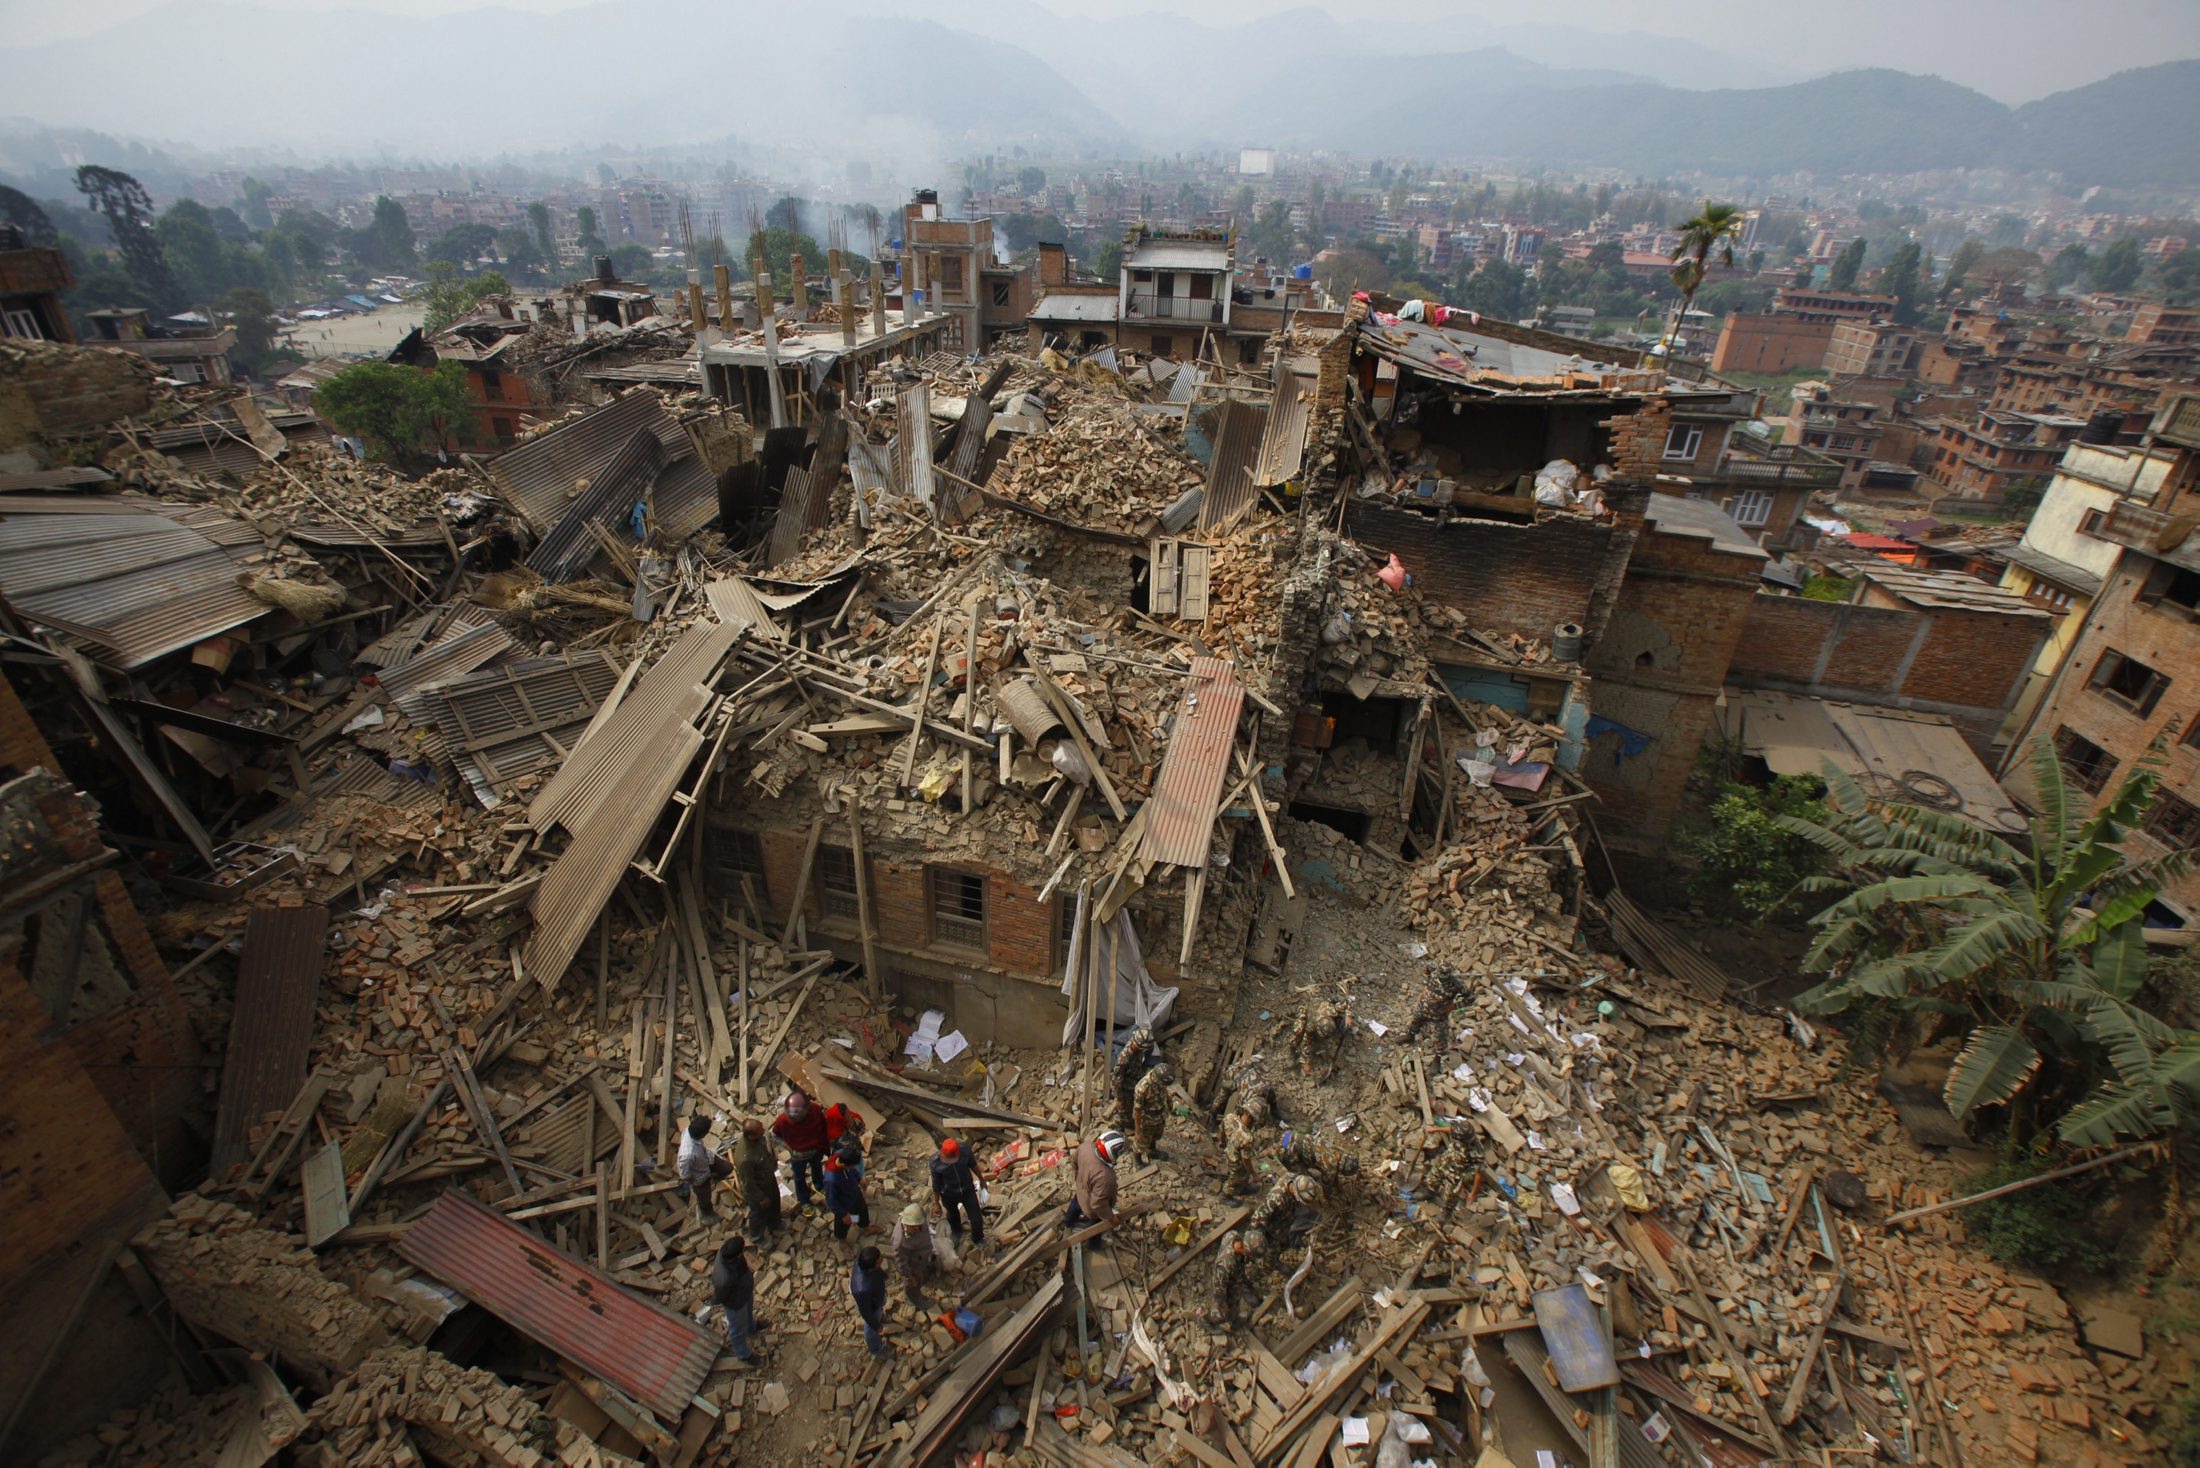 Rescue workers remove debris as they search for victims of earthquake in Bhaktapur near Kathmandu, Nepal, Sunday, April 26, 2015. A strong magnitude earthquake shook Nepal's capital and the densely populated Kathmandu Valley before noon Saturday, causing extensive damage with toppled walls and collapsed buildings, officials said. (AP Photo/Niranjan Shrestha)